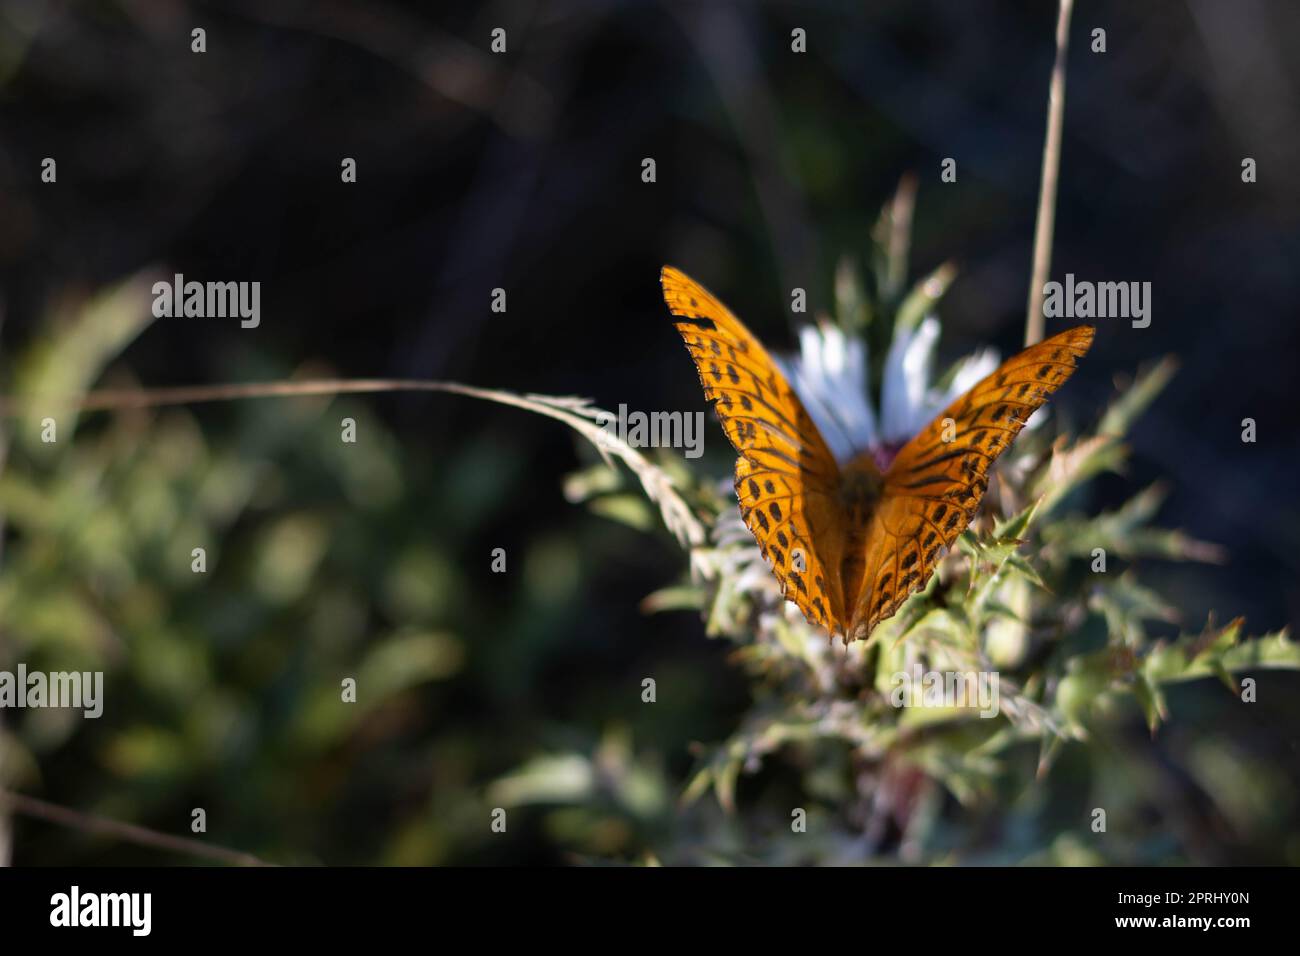 Silver washed fritillary butterfly, deep orange with black spots, Parma Italy Stock Photo